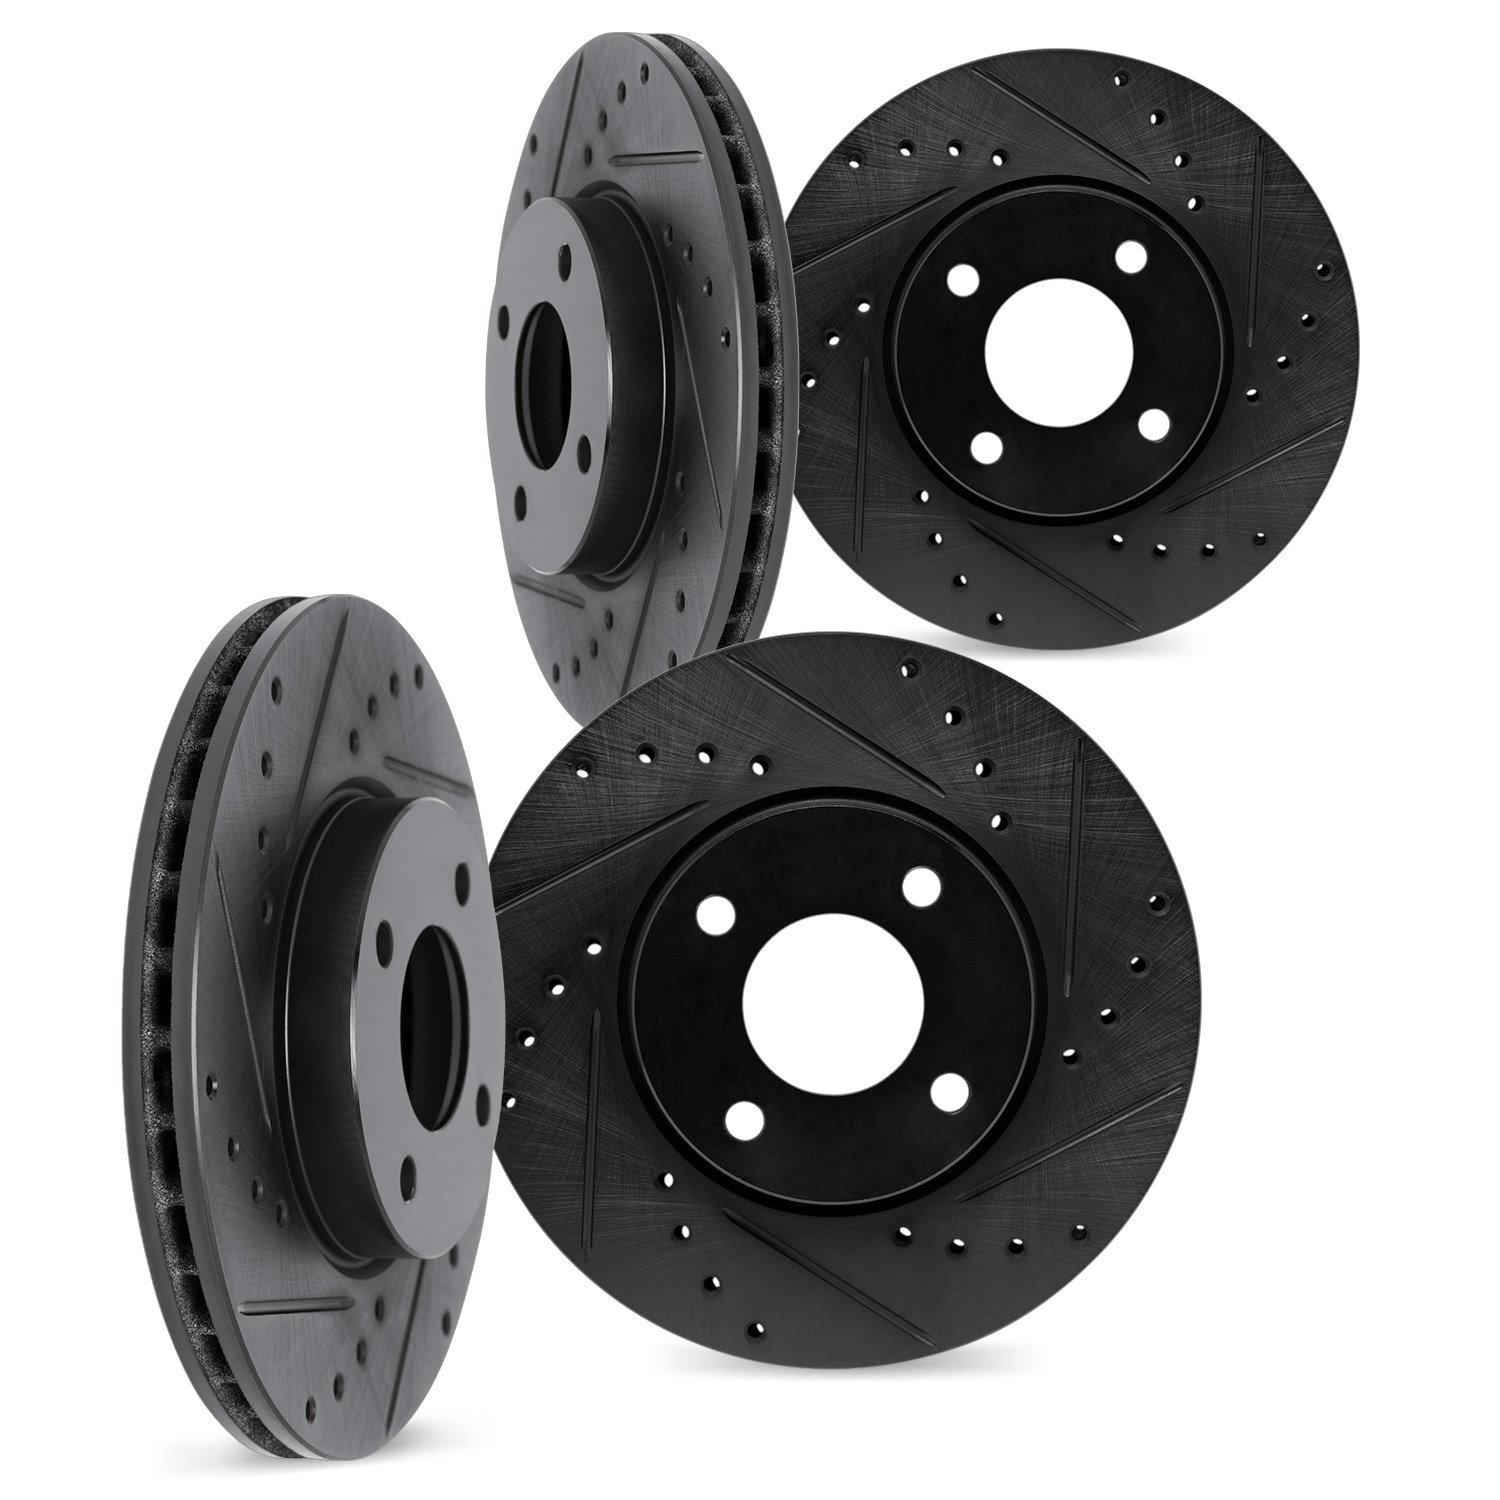 8004-76115 Drilled/Slotted Brake Rotors [Black], 2000-2005 Lexus/Toyota/Scion, Position: Front and Rear